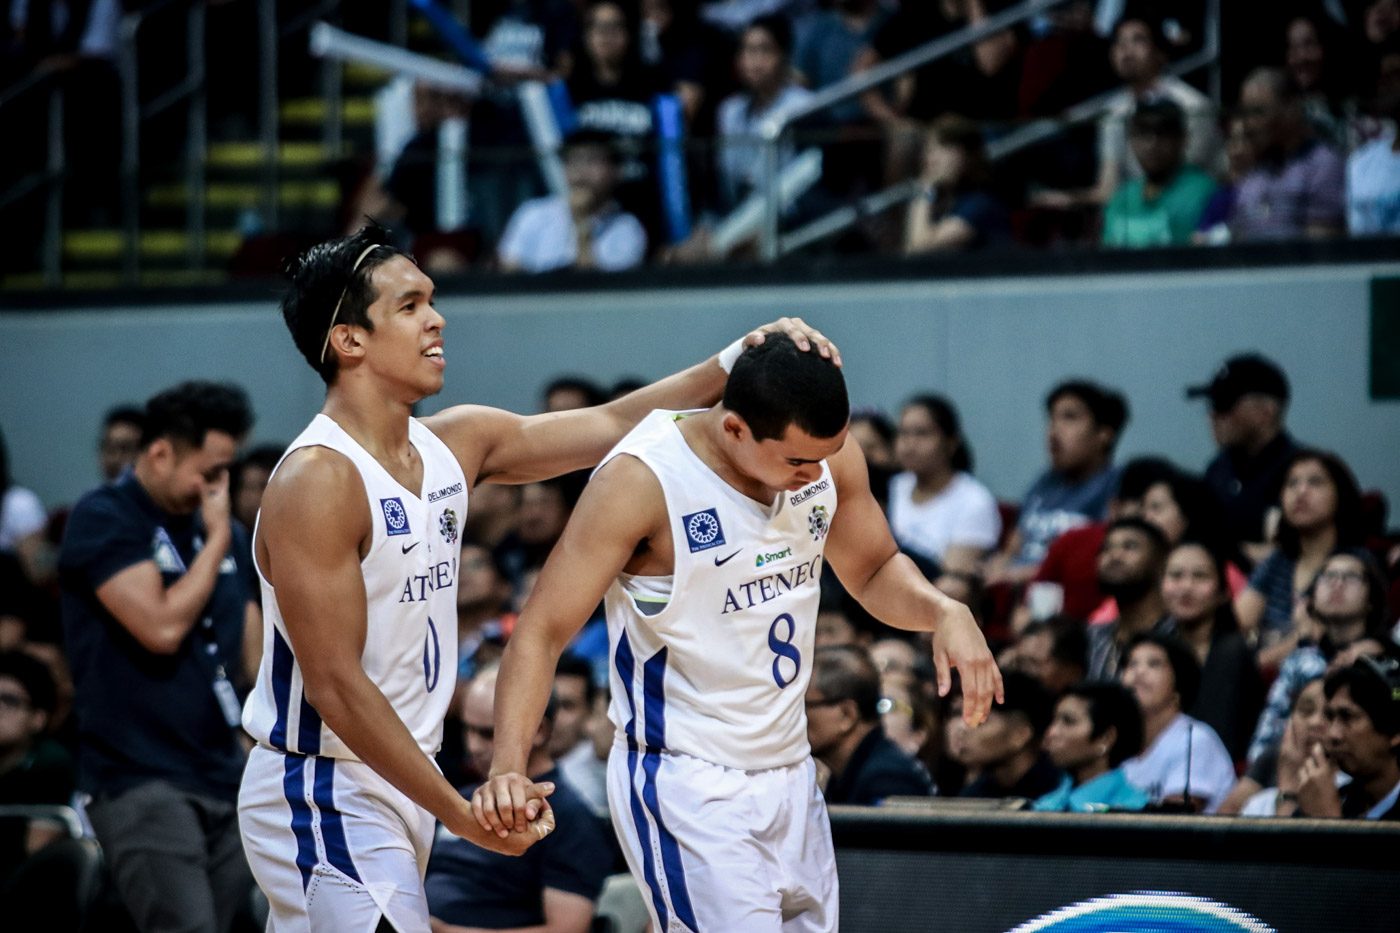 Ateneo rips UST by 40 points, sweeps 2nd round